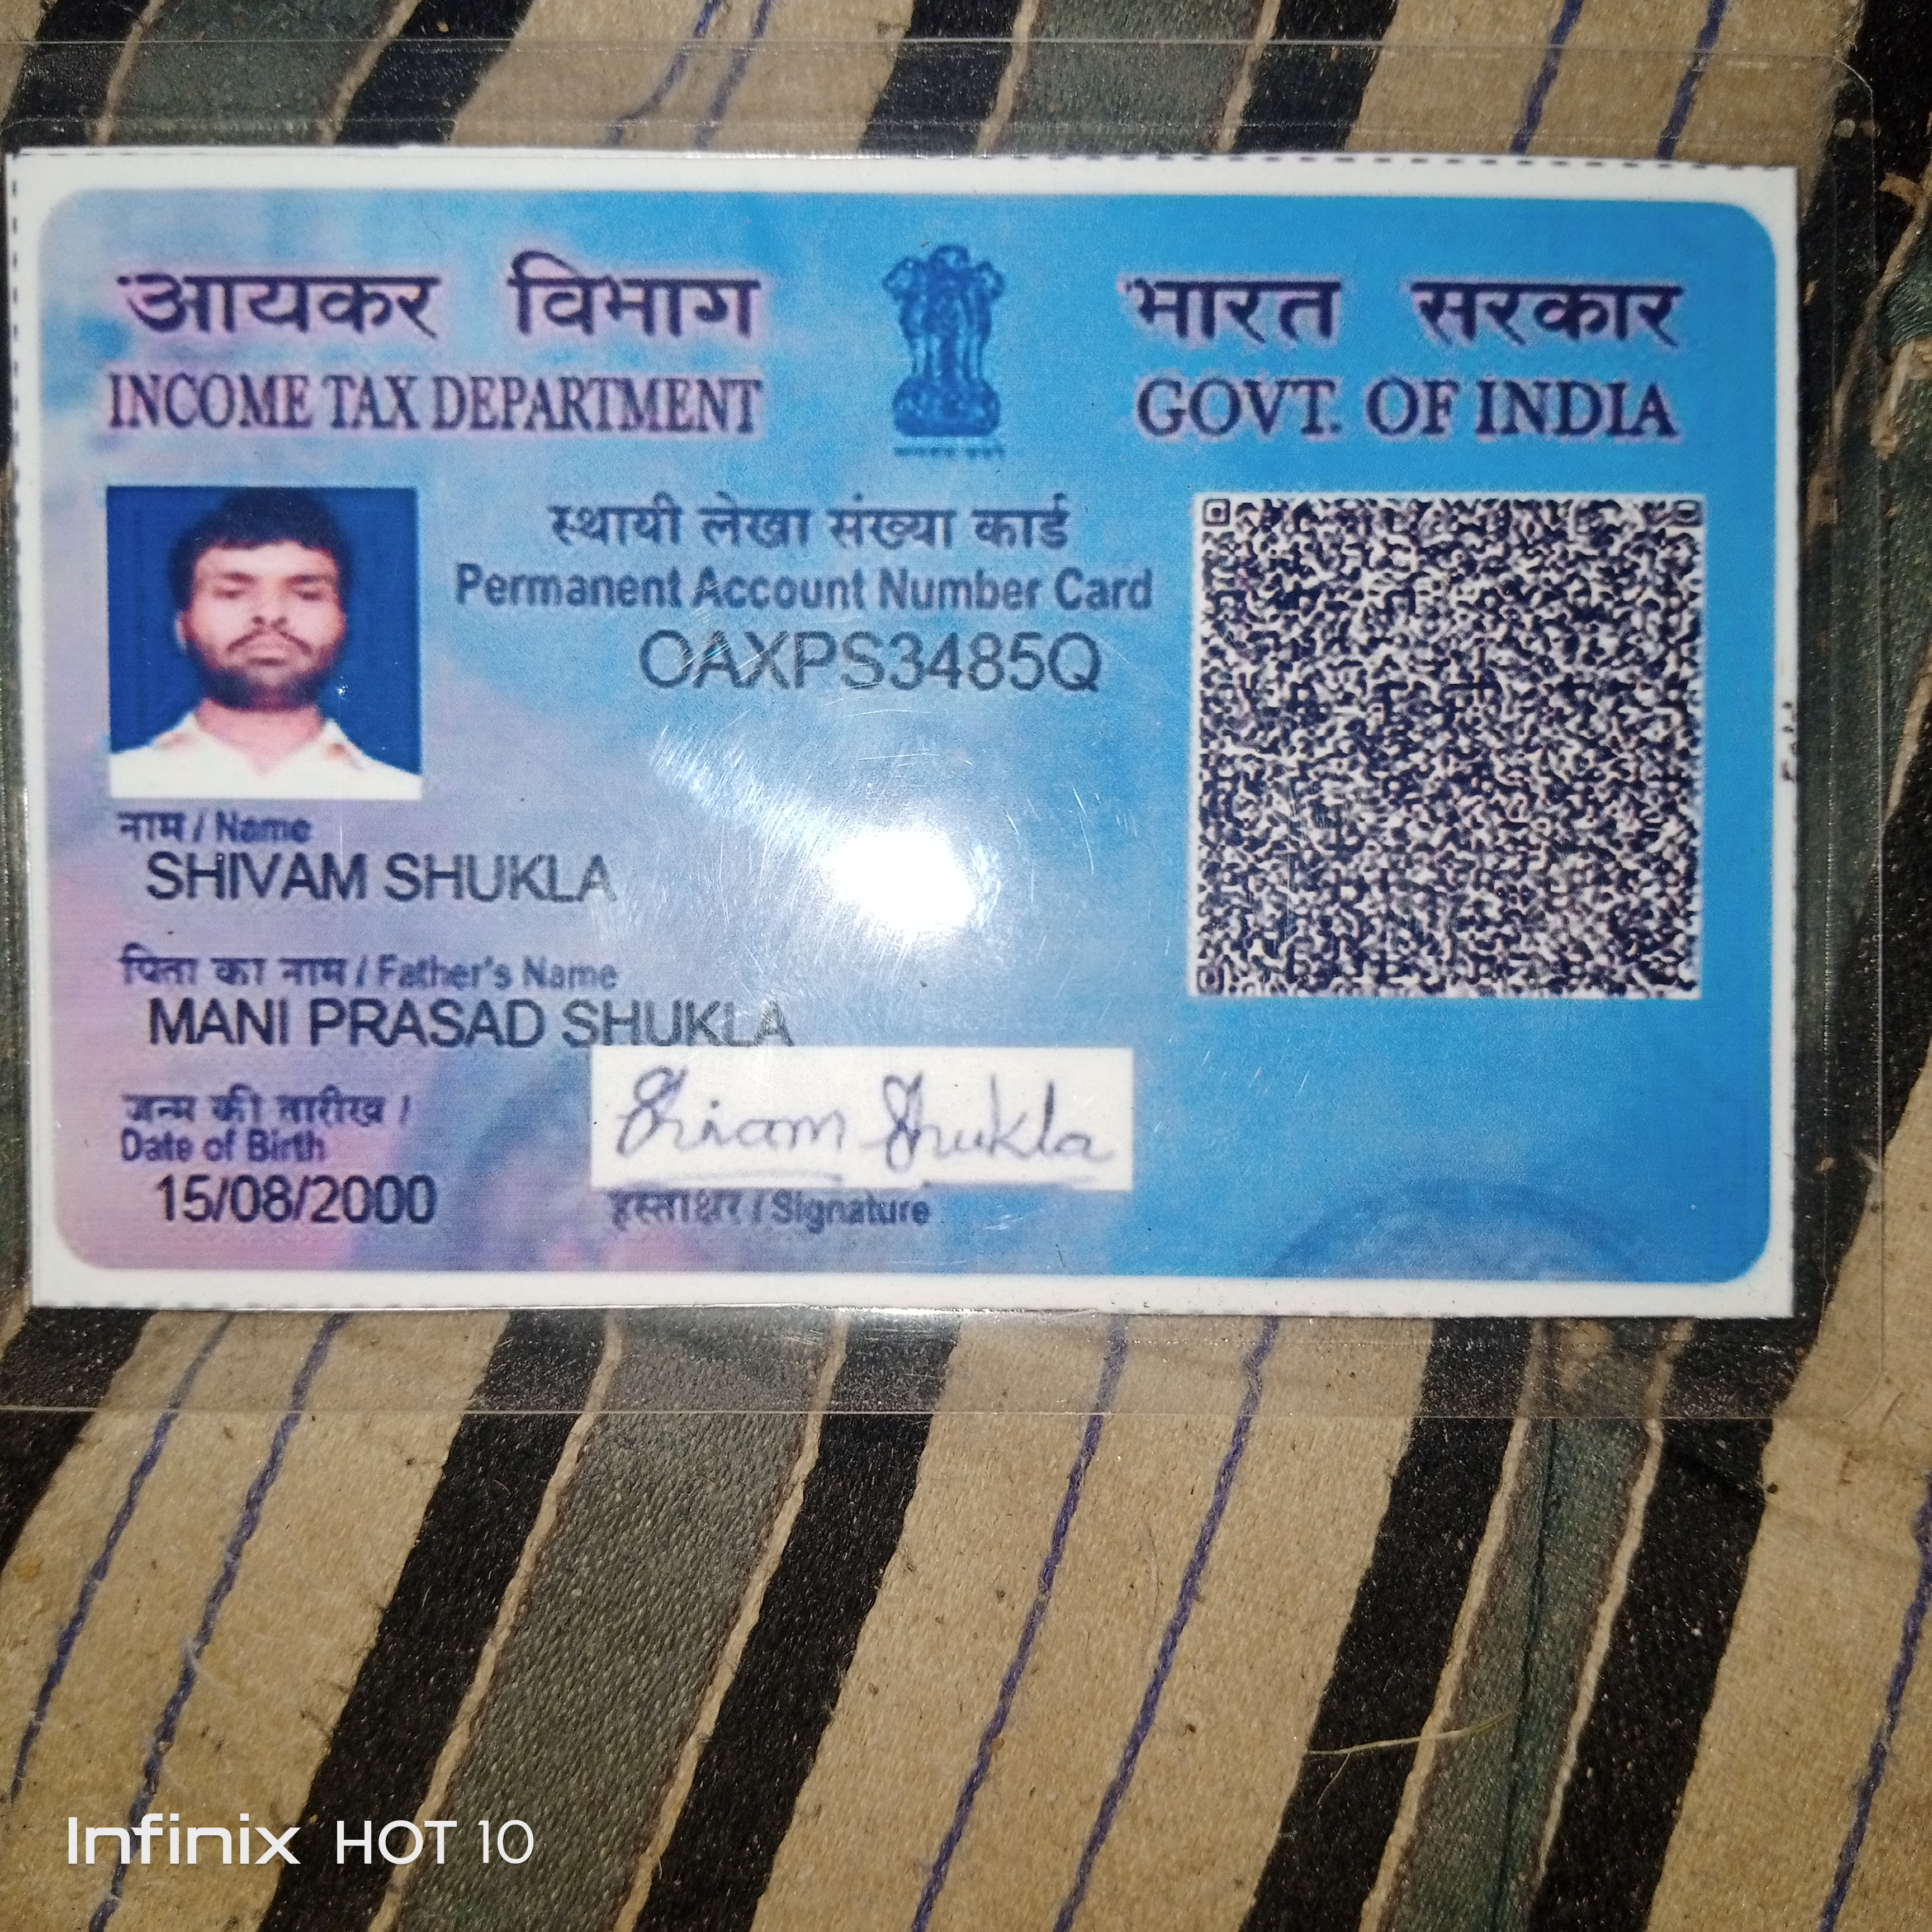 WEY PTE

Permanent Account Number Card

CAXPS3485Q

1° / Name
SHIVAM SHUKLA

fom = ITH Father's Nan

MANI PRASAD

#1 wf)
Date of Birth

2

{ Signature